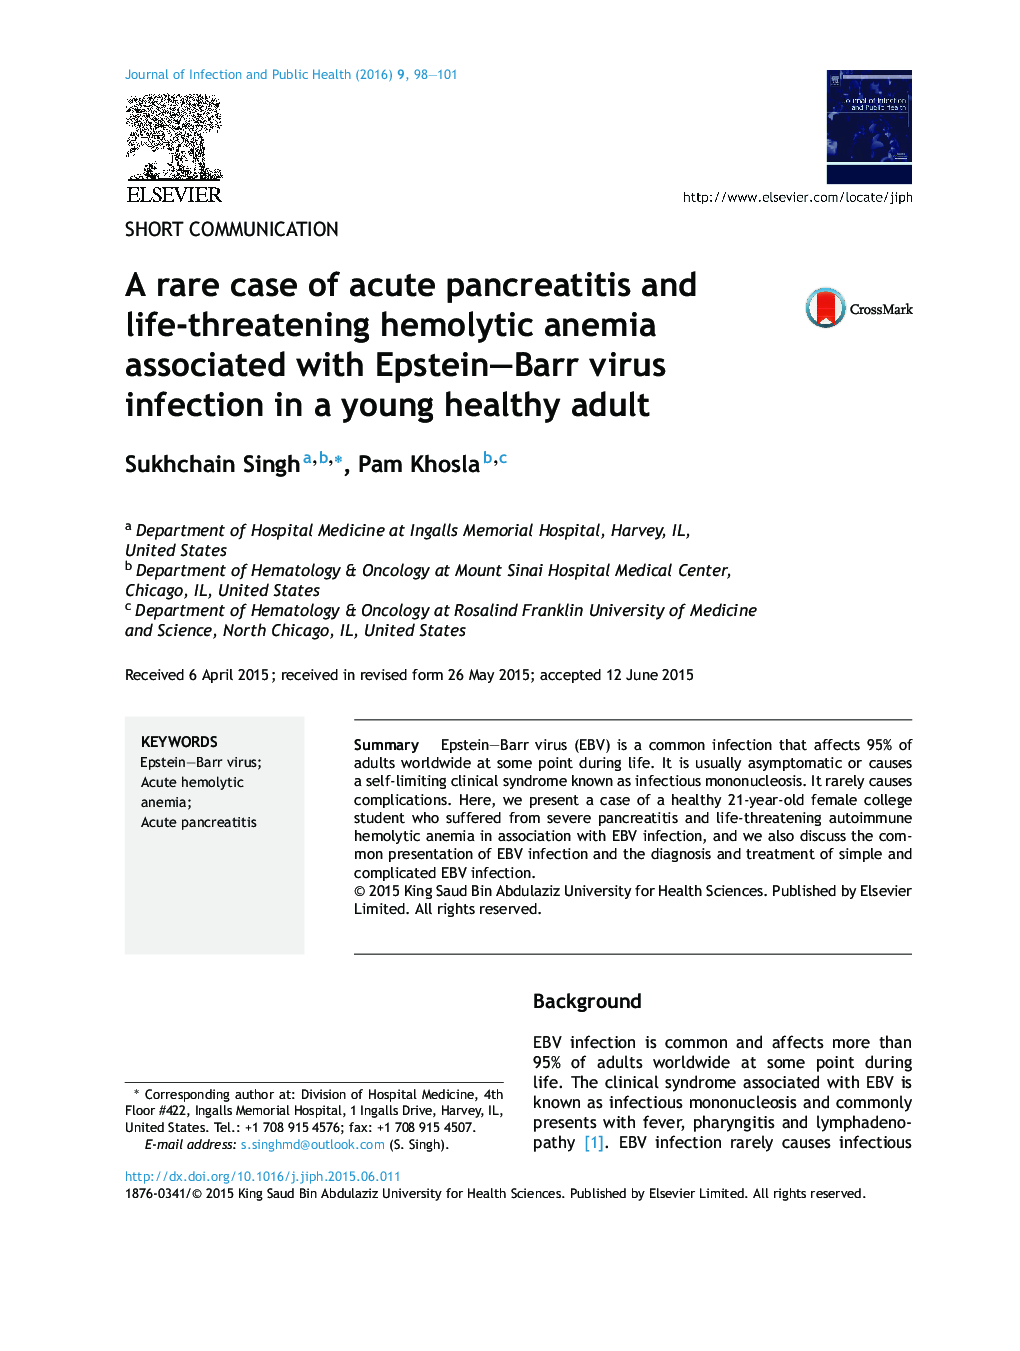 A rare case of acute pancreatitis and life-threatening hemolytic anemia associated with Epstein–Barr virus infection in a young healthy adult